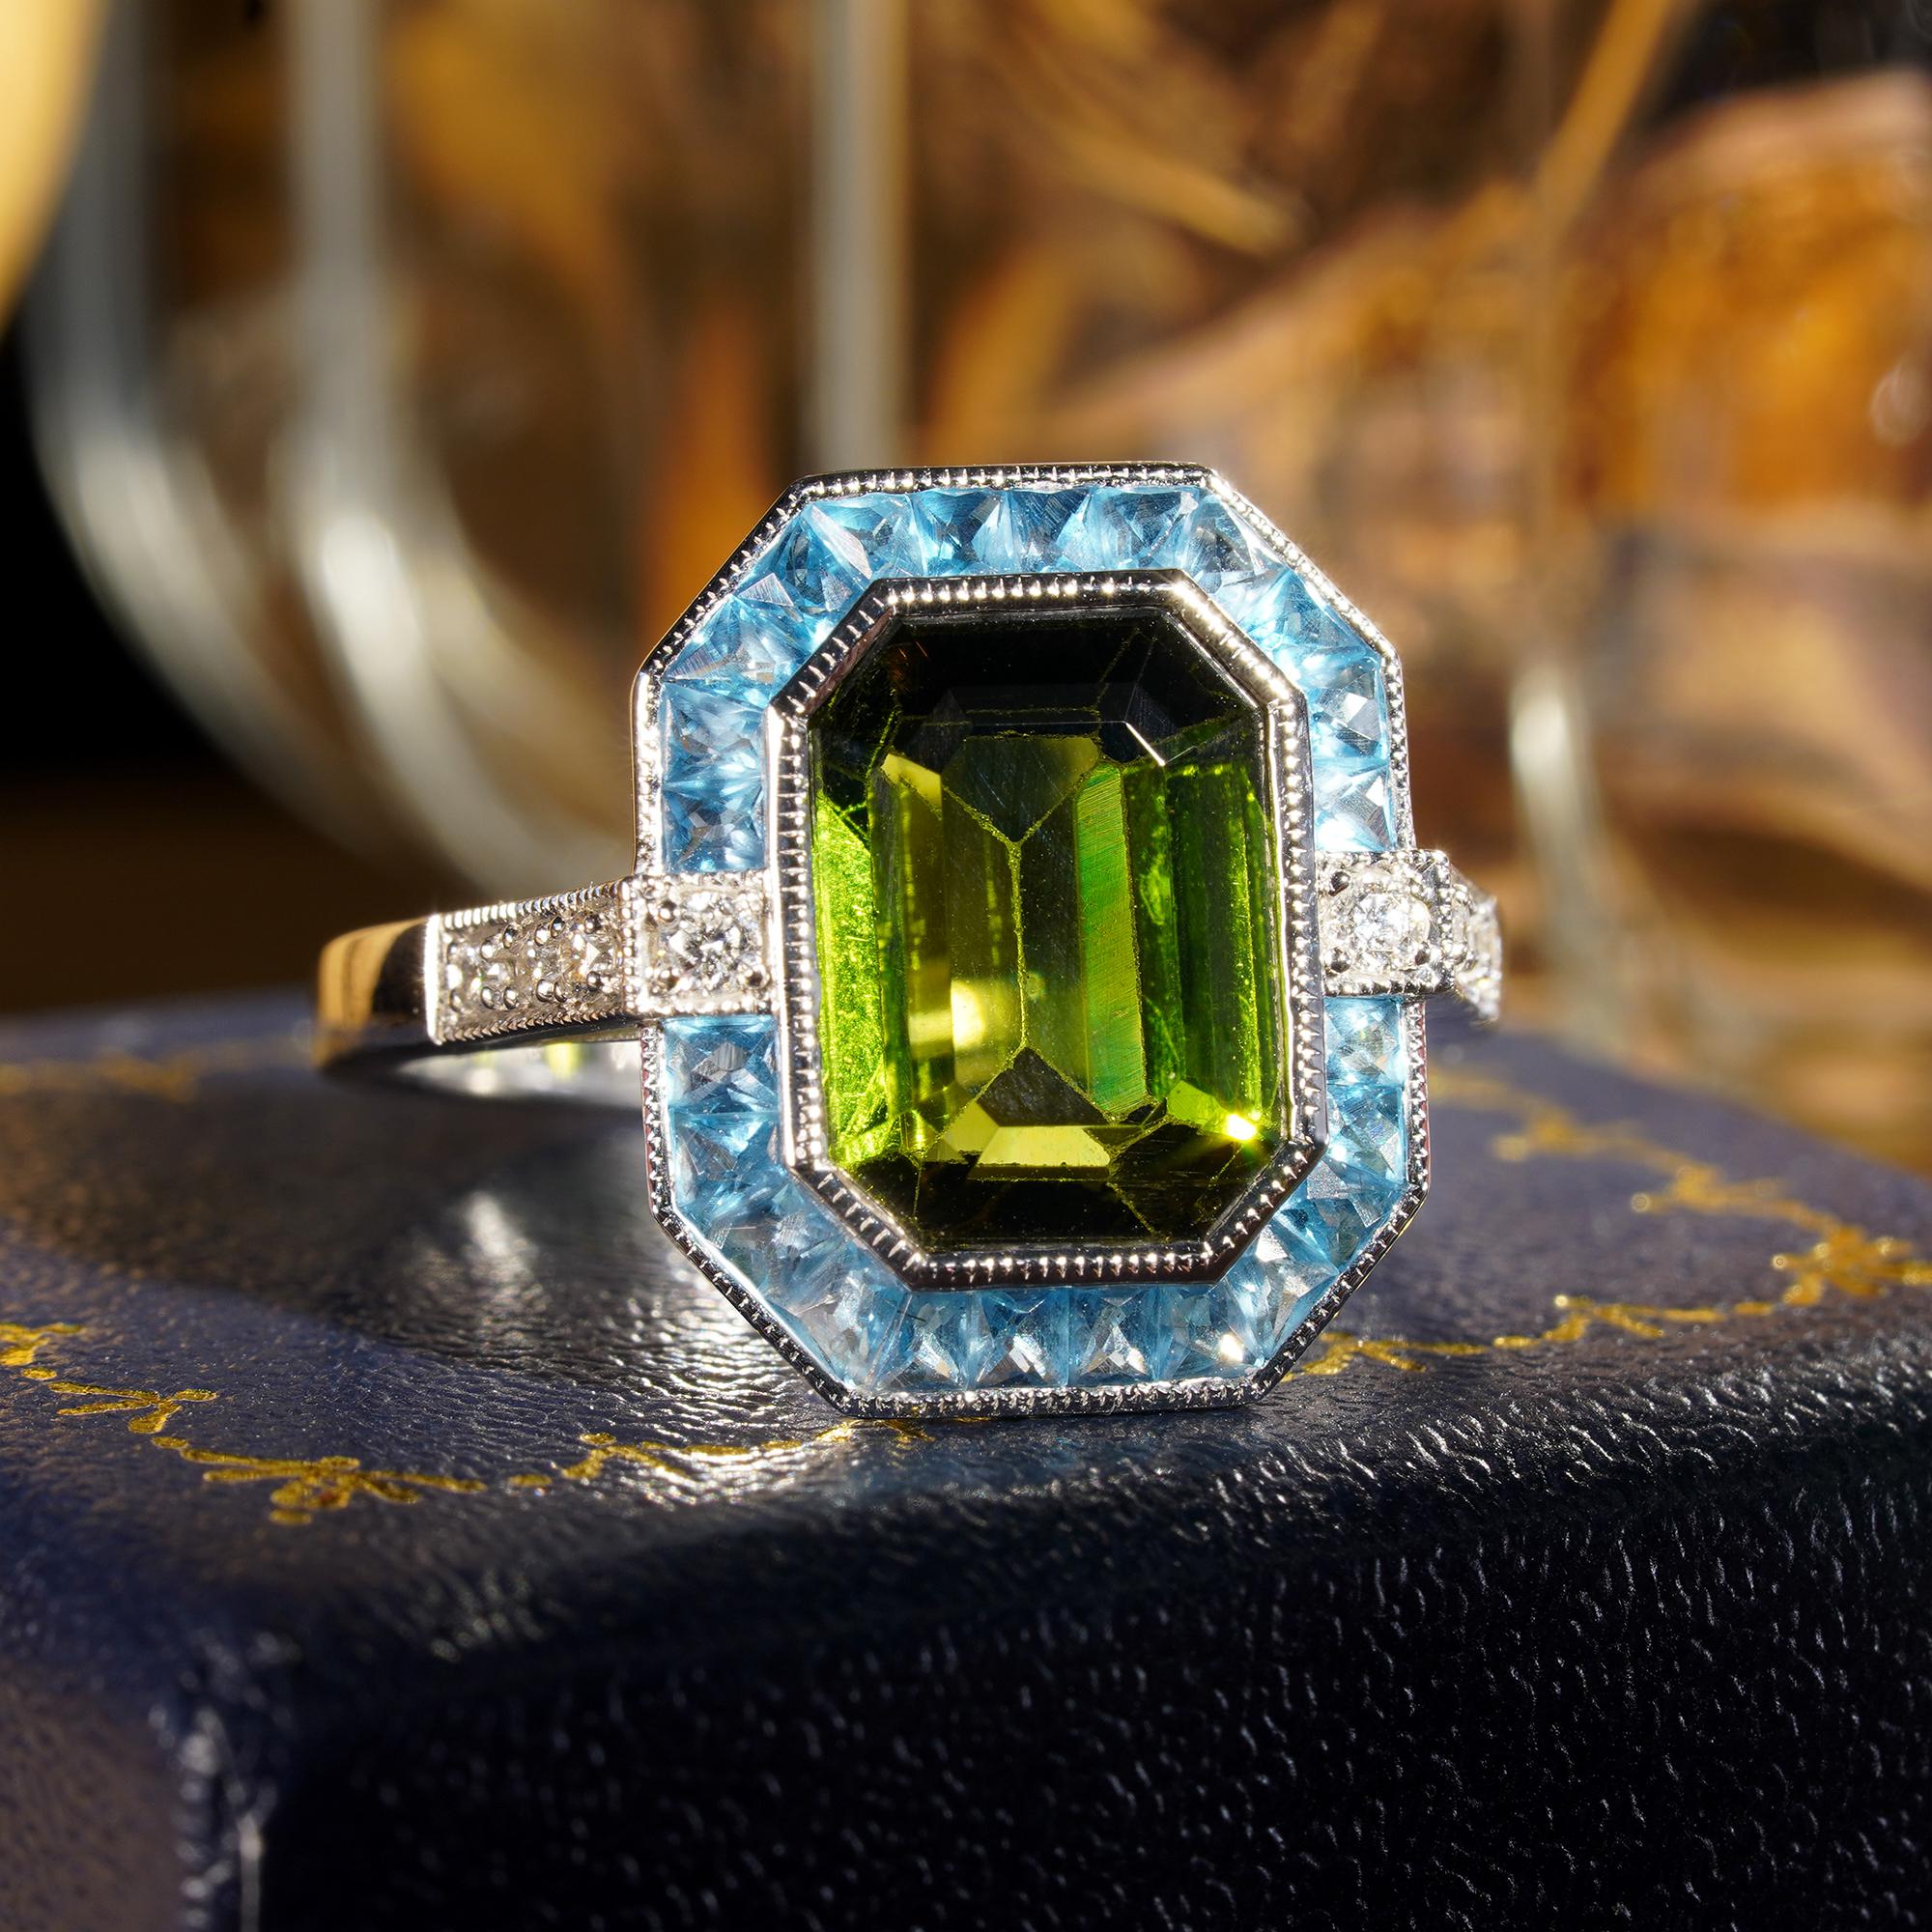 Centering an emerald cut green tourmaline, accented by French cut London blue topaz, enhanced by round cut diamonds. This Art Deco inspired ring is a perfect piece for an engagement ring, or to commemorate an anniversary.

Ring Information
Style: